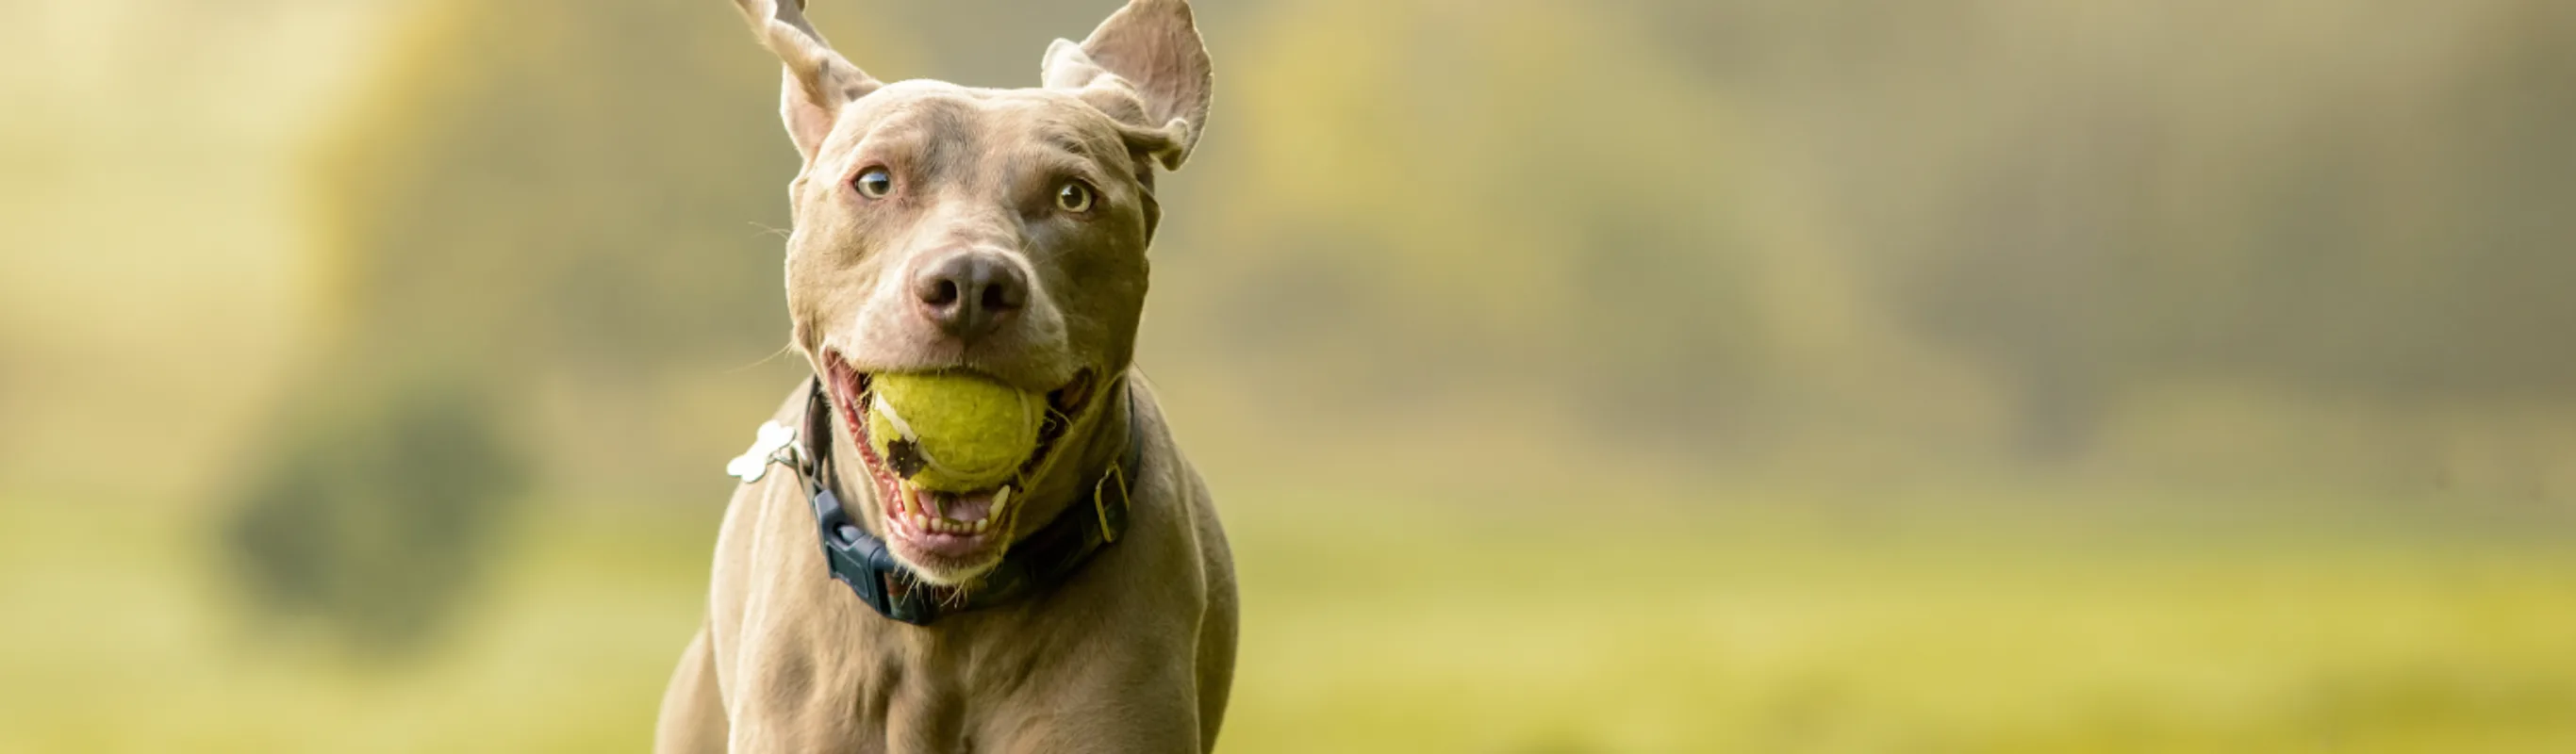 Dog running with a ball in mouth